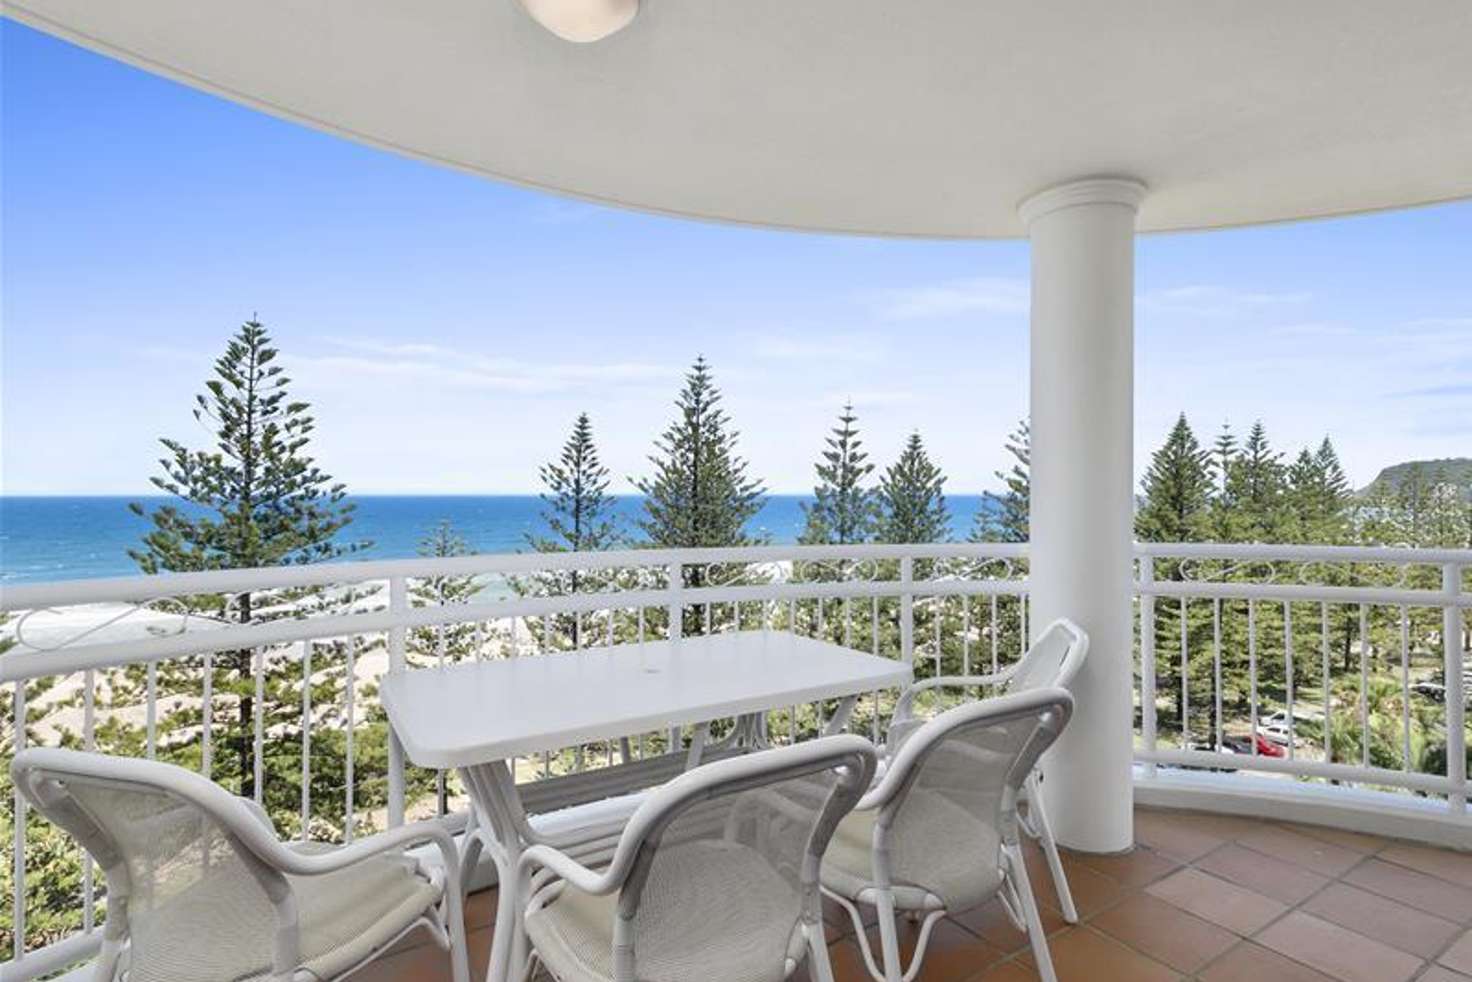 Main view of Homely apartment listing, 222 The Esplanade, Burleigh Heads QLD 4220